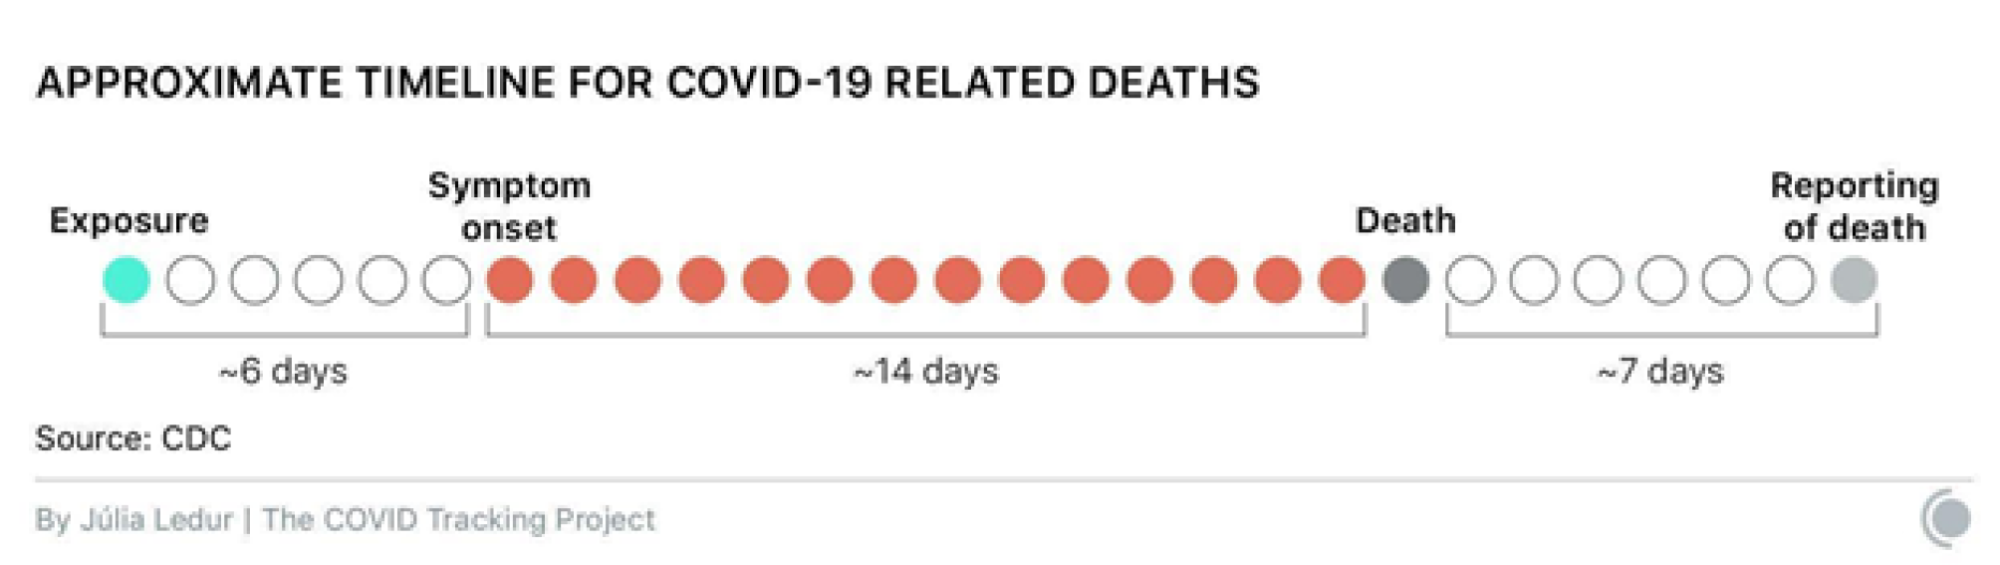 A graphic showing the timeline of an average COVID-19 disease progression. Symptoms follow exposure by about 6 days, death follows symptoms by about 14 days, and reporting of deaths follow afterward by 7 days.